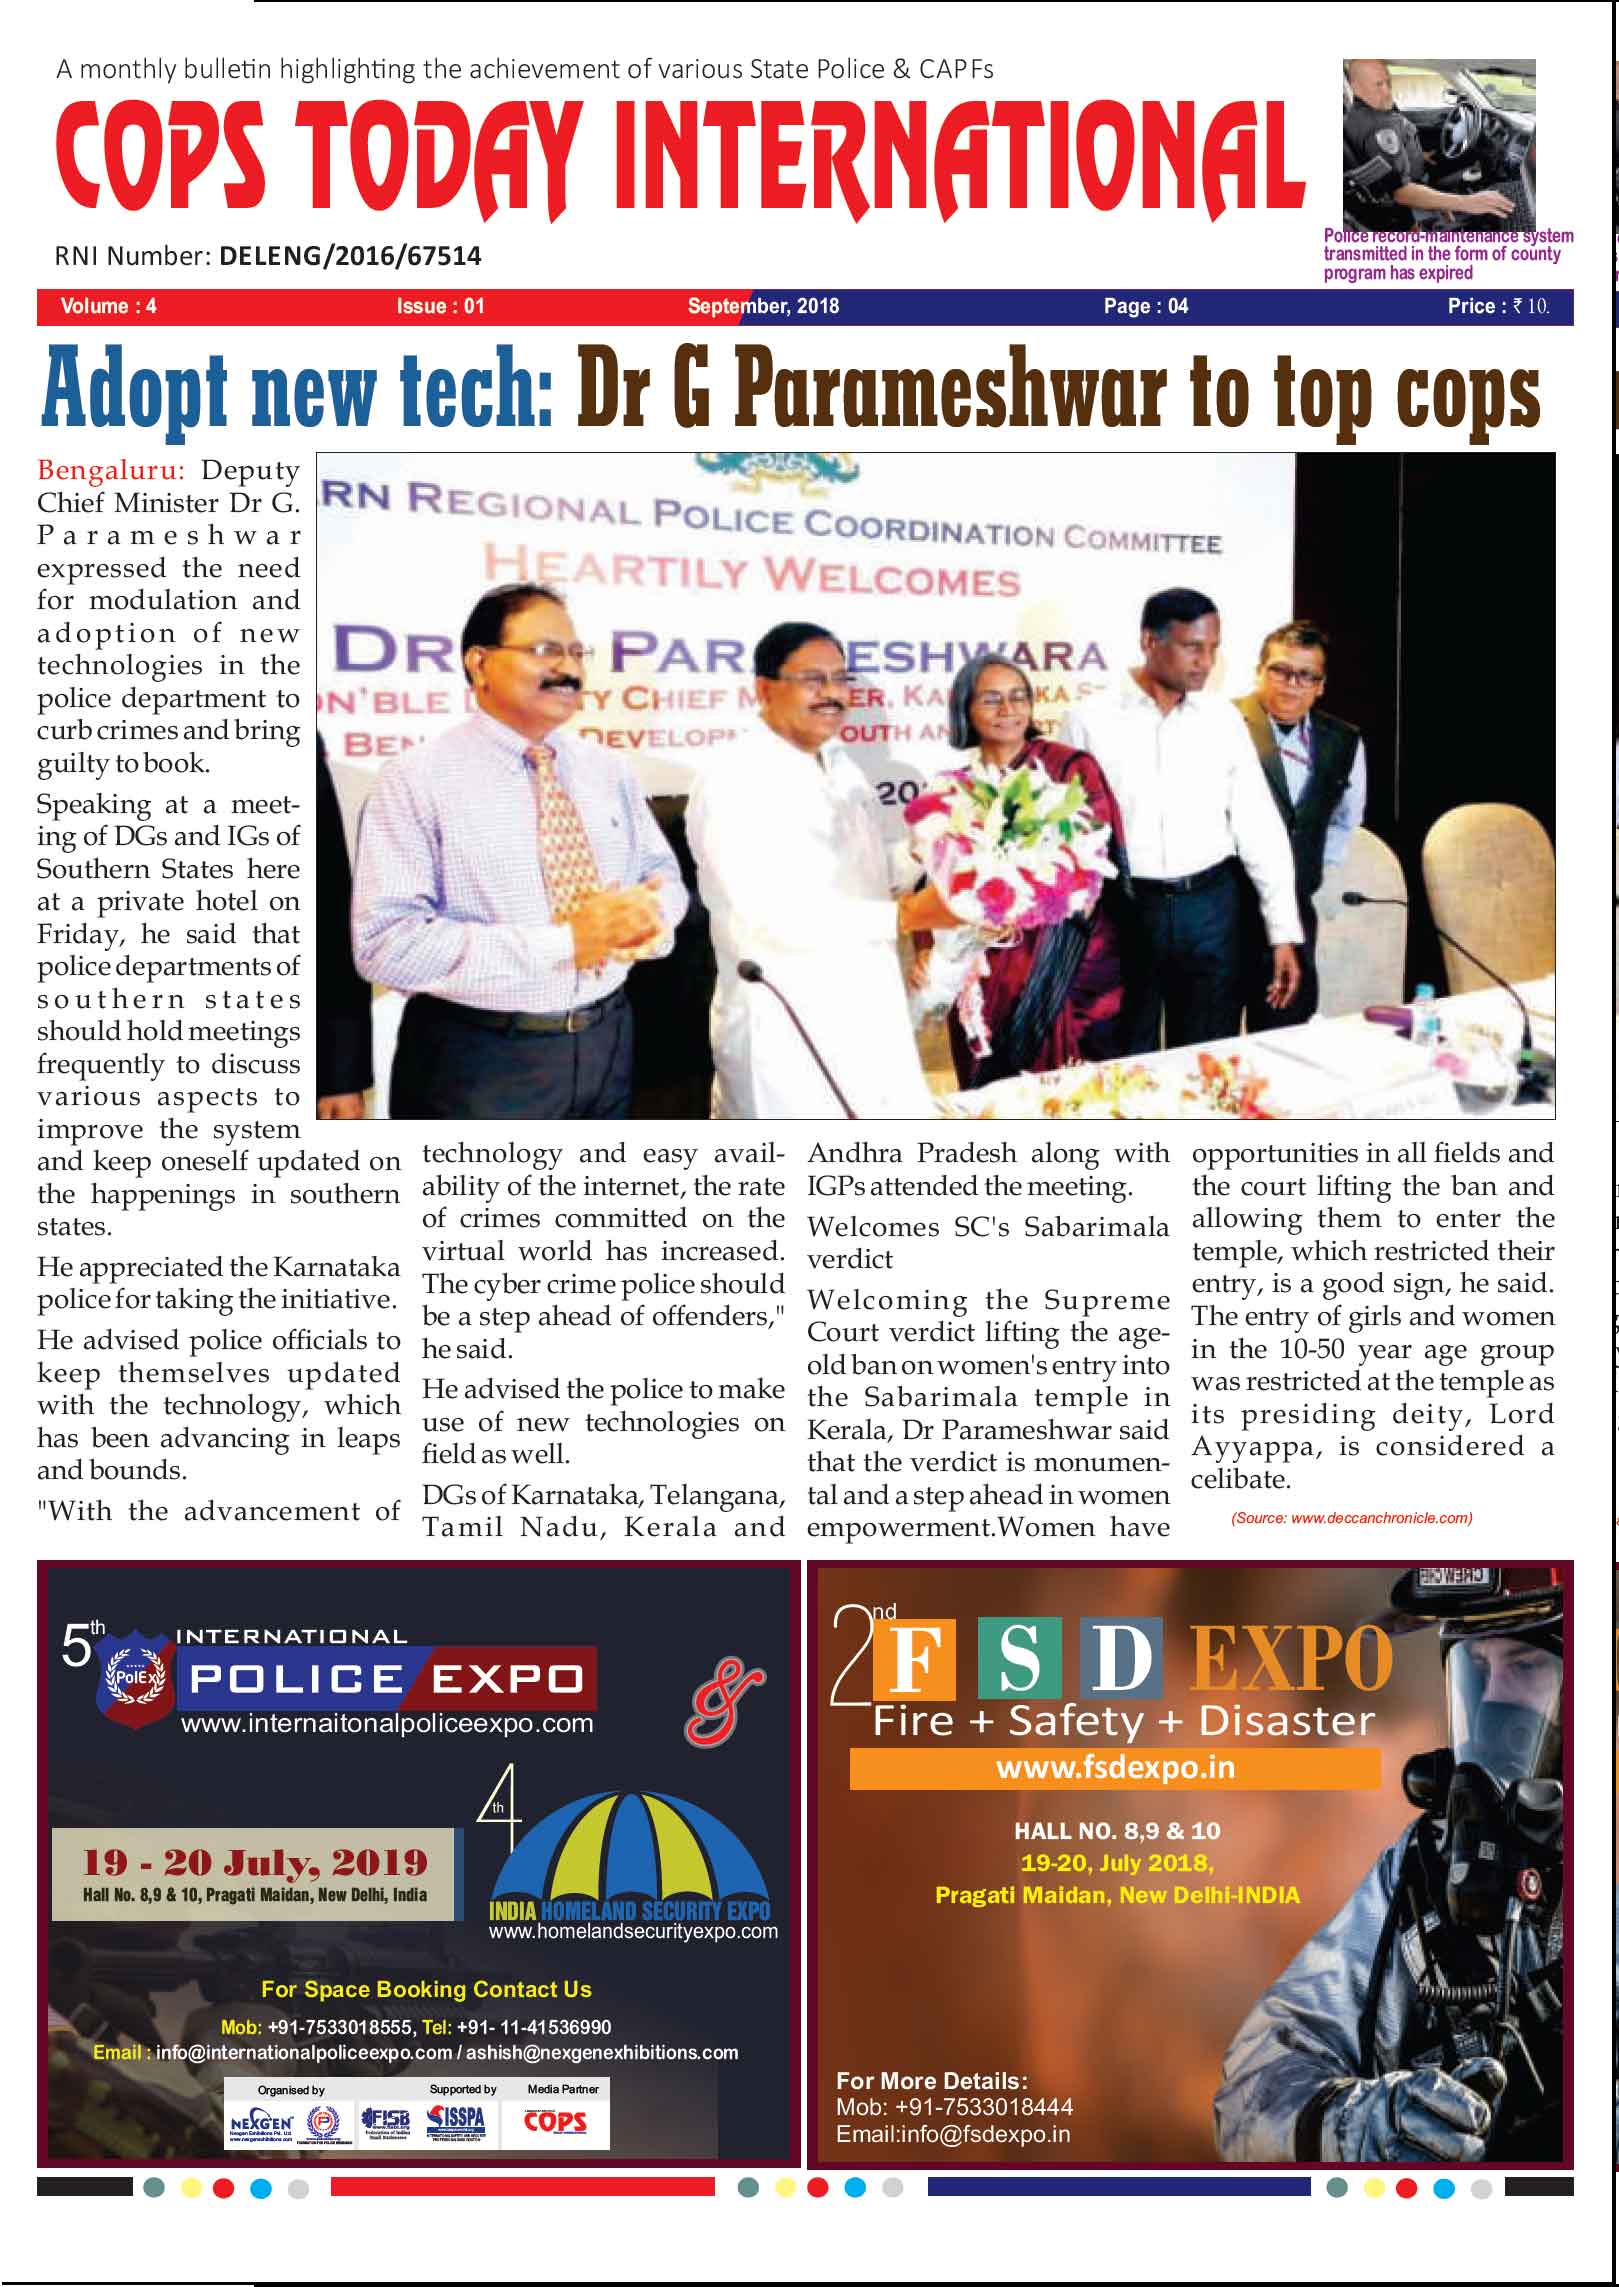 Cops Today News Paper of September 2018